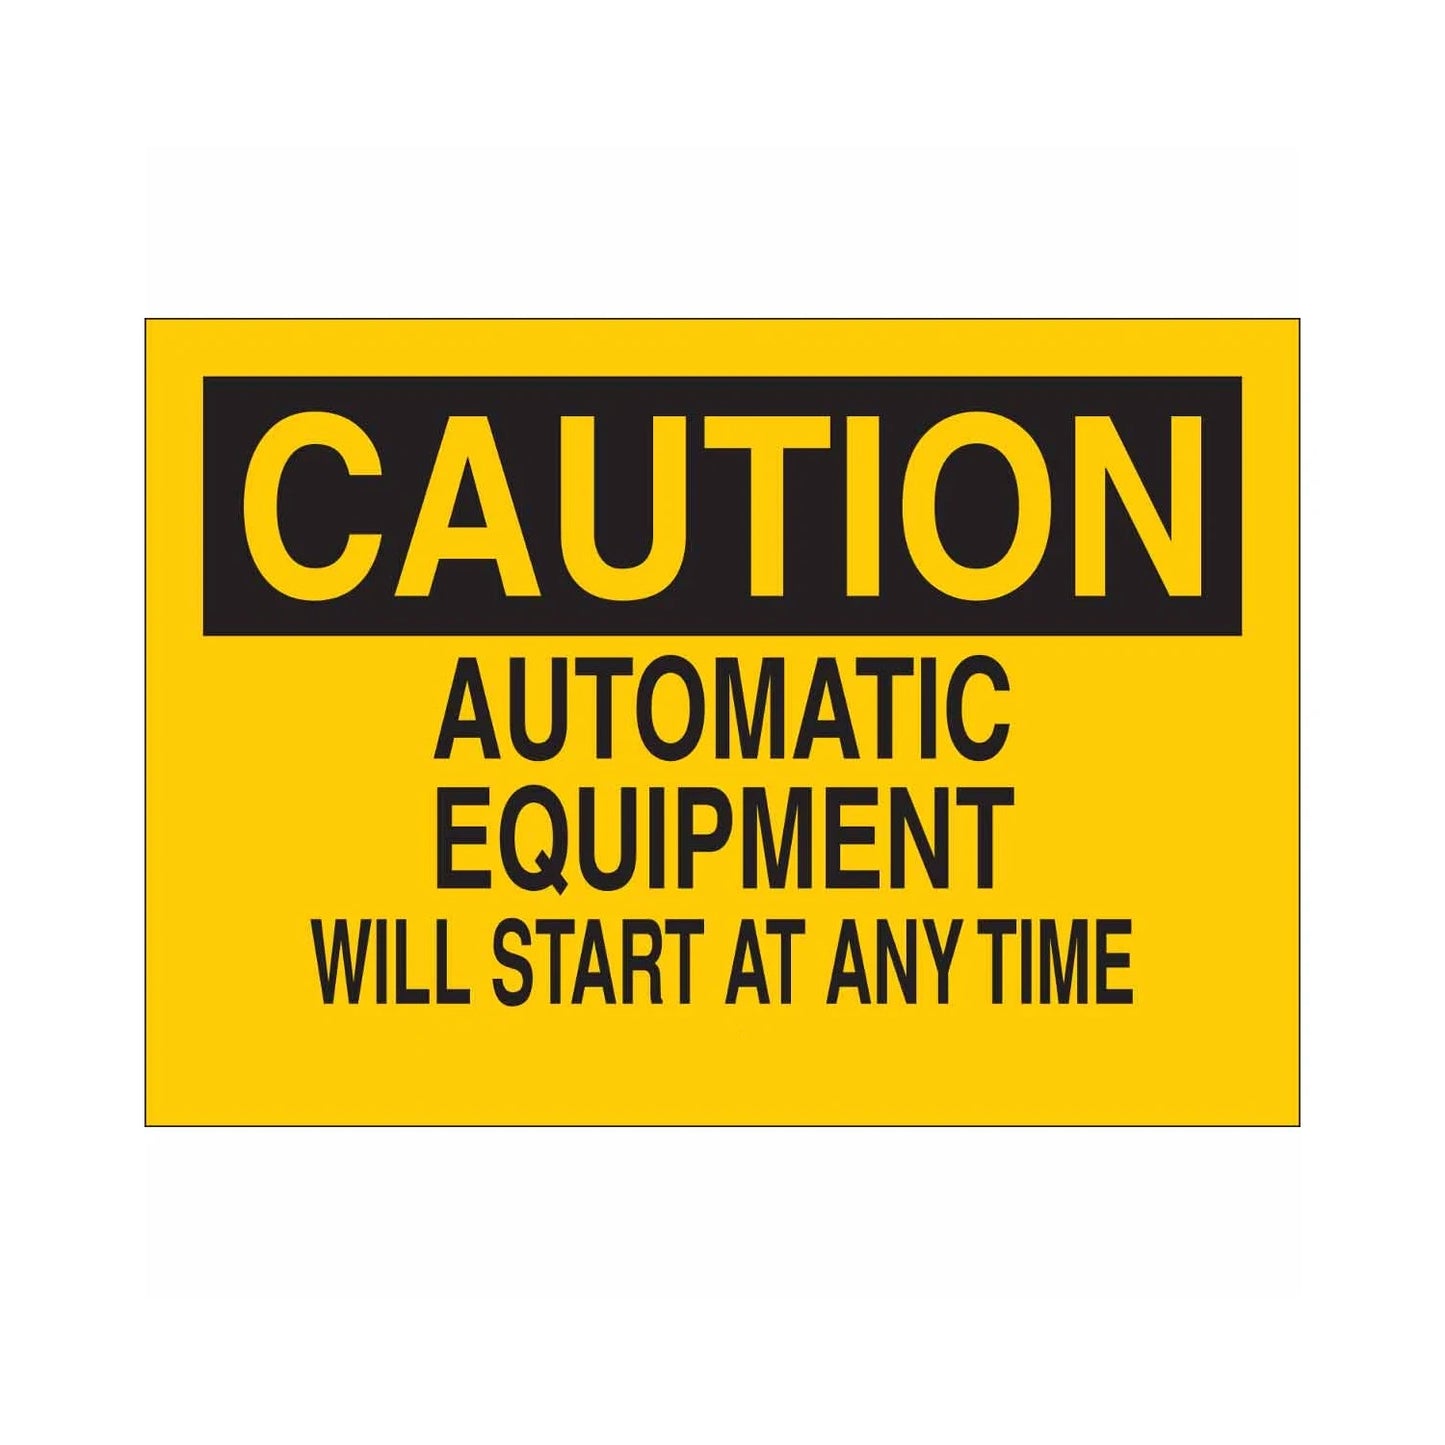 CAUTION Automatic Equipment Will Start At Any Time Sign